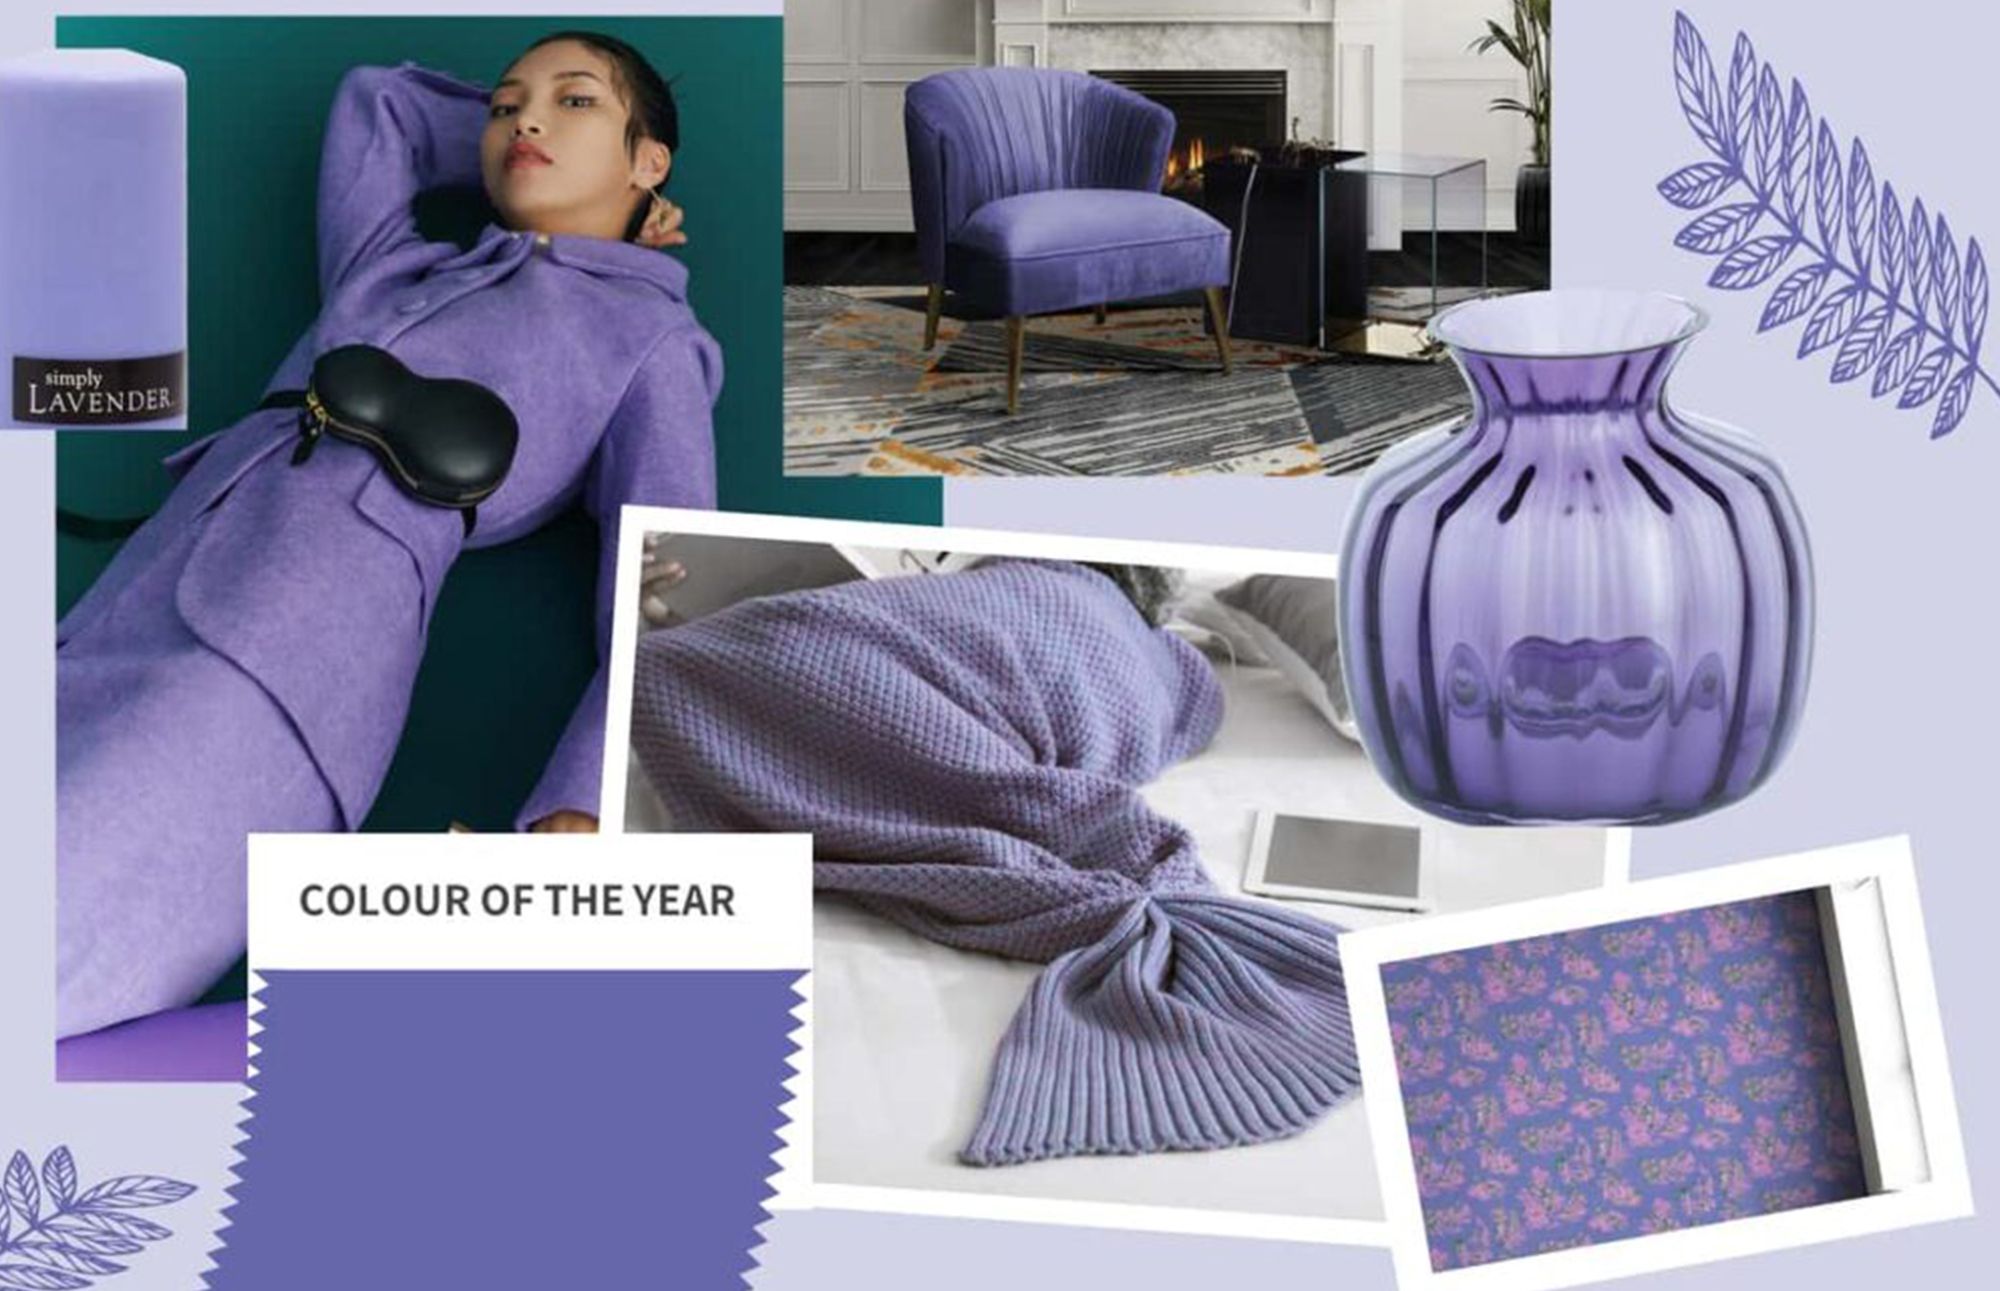 Pantone Announces Color Of The Year For 2022 - Very Peri